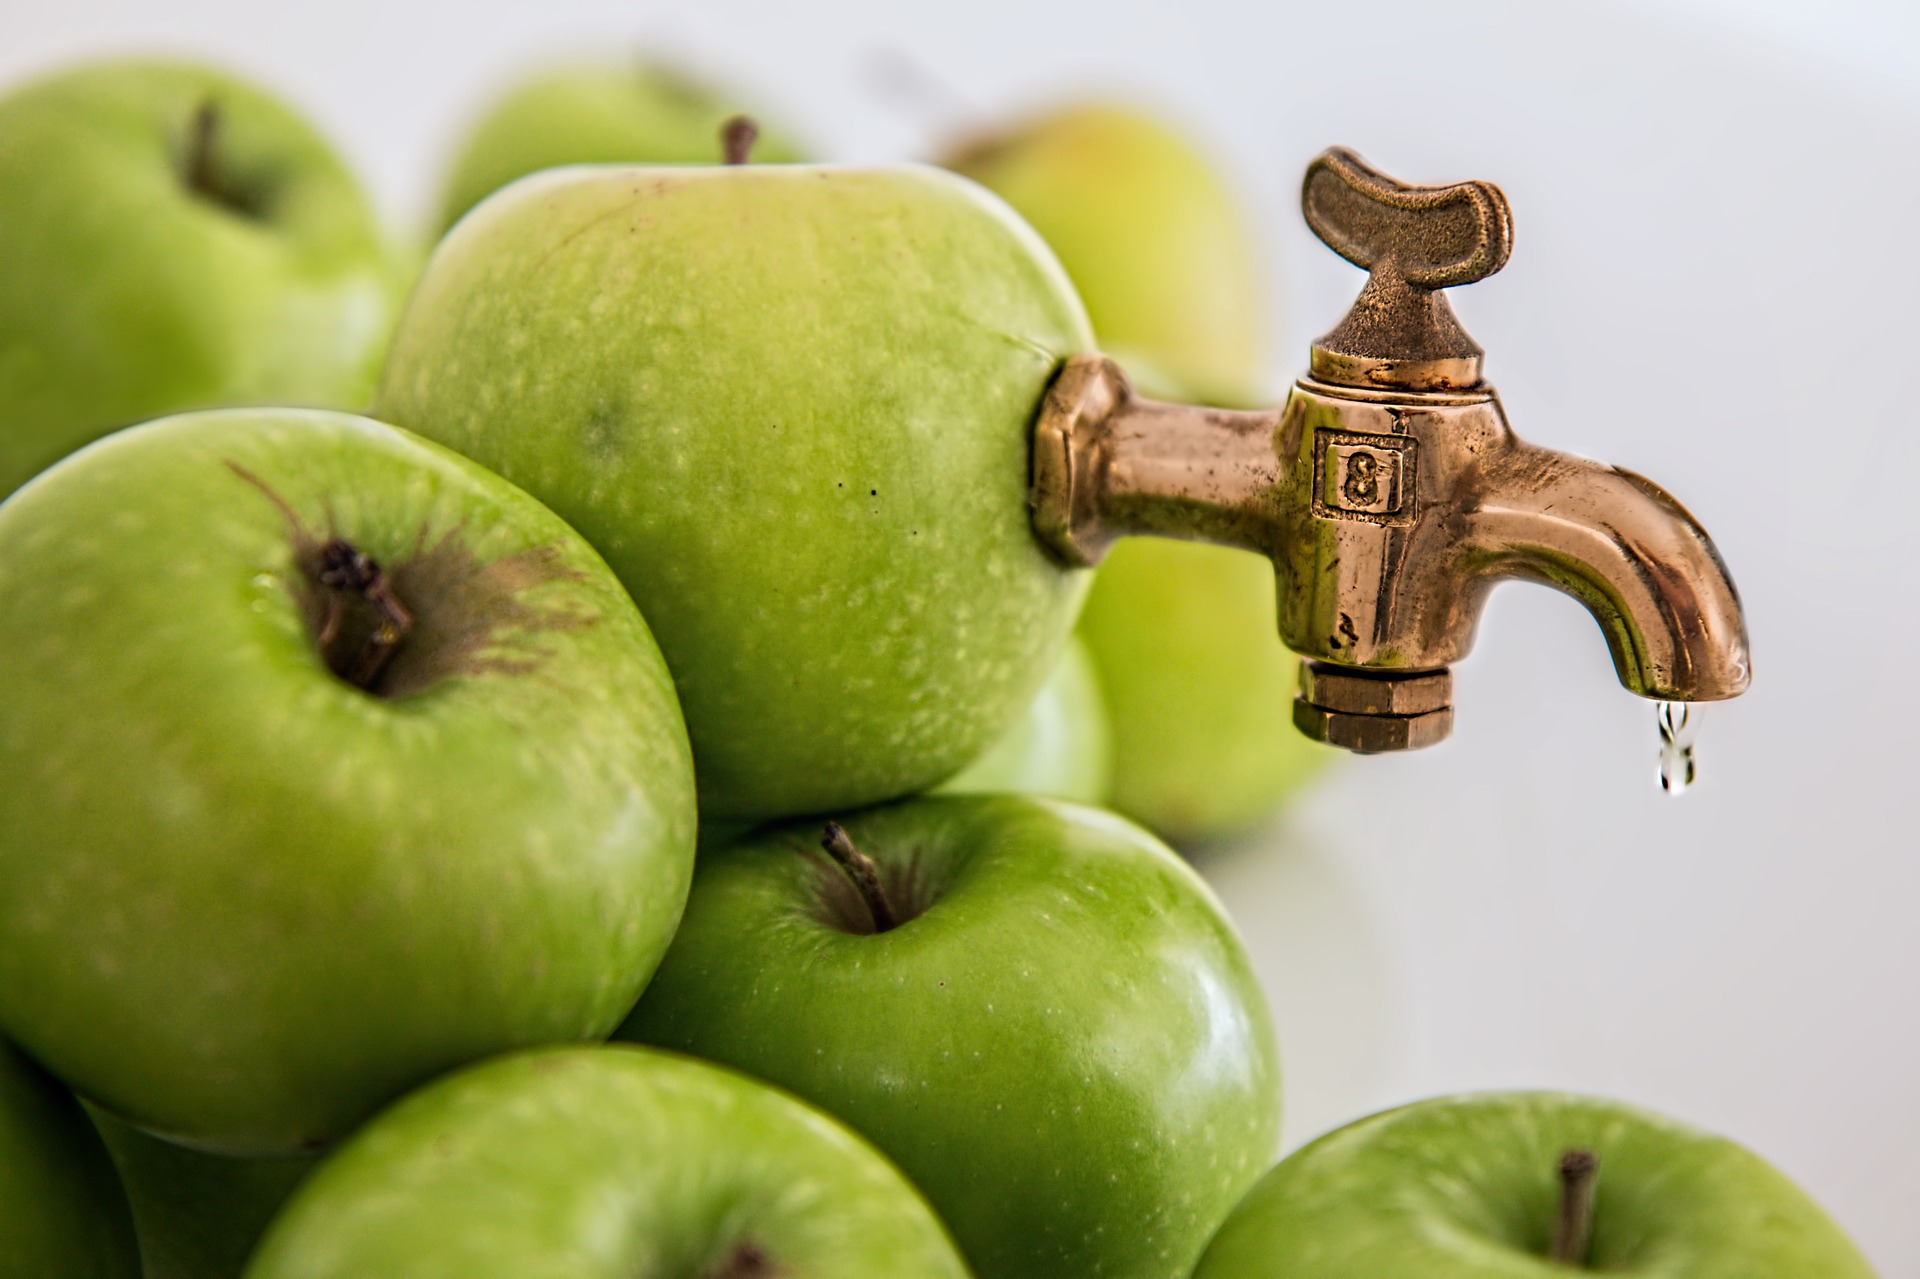 Learn How to Make Apple Juice: The 5-Step Guide